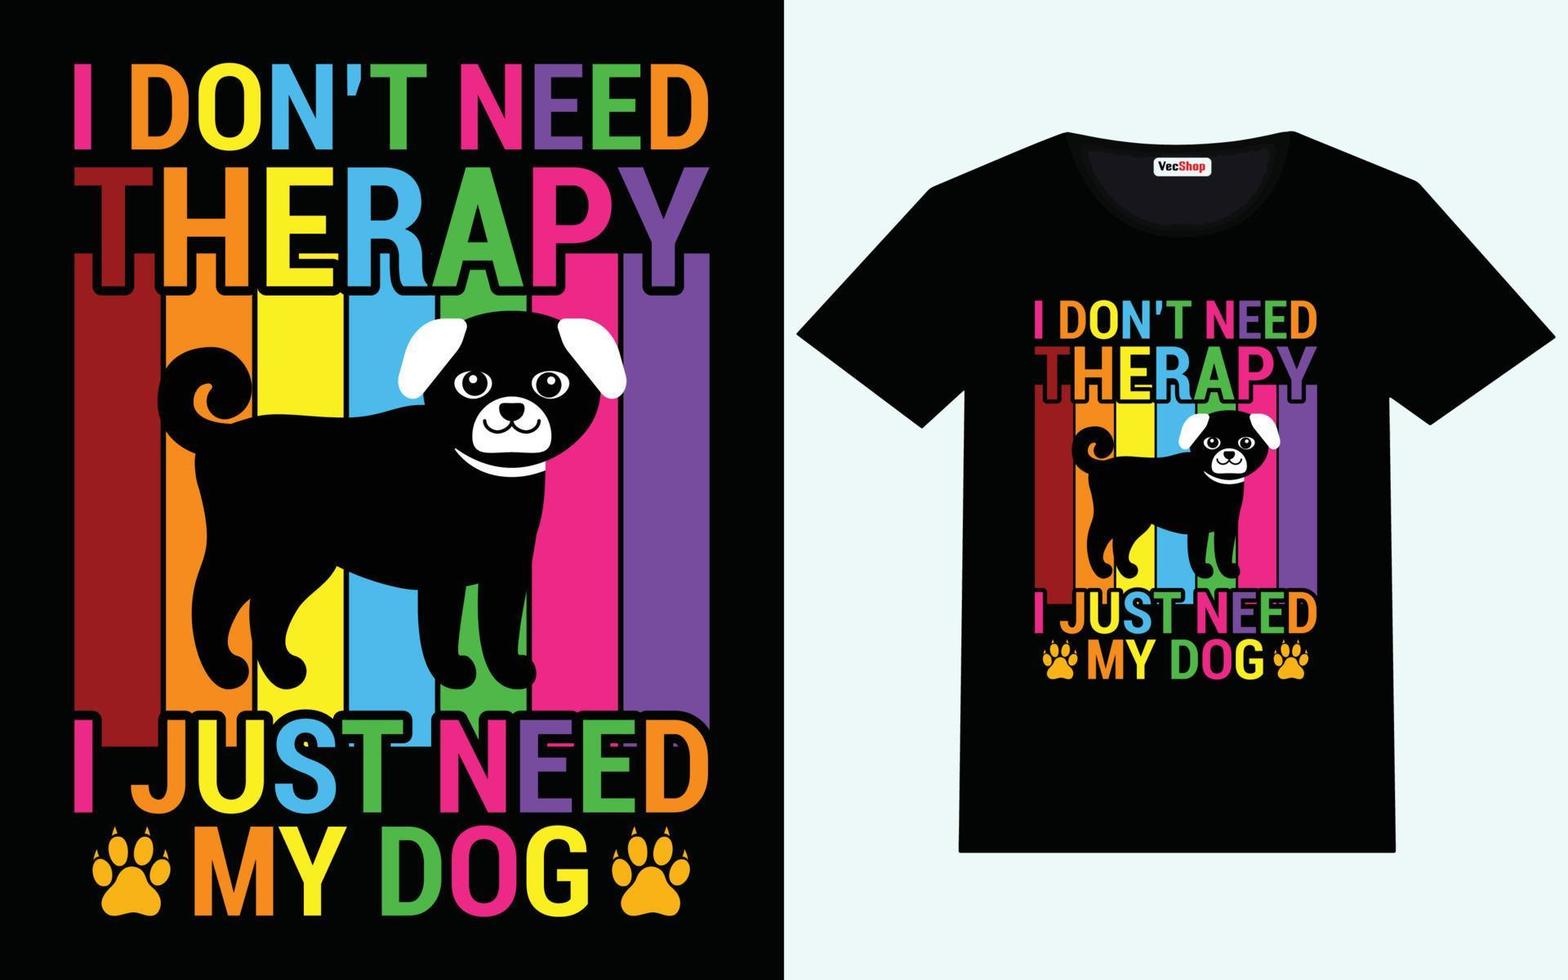 Dog t-shirt design graphic vector and typography design